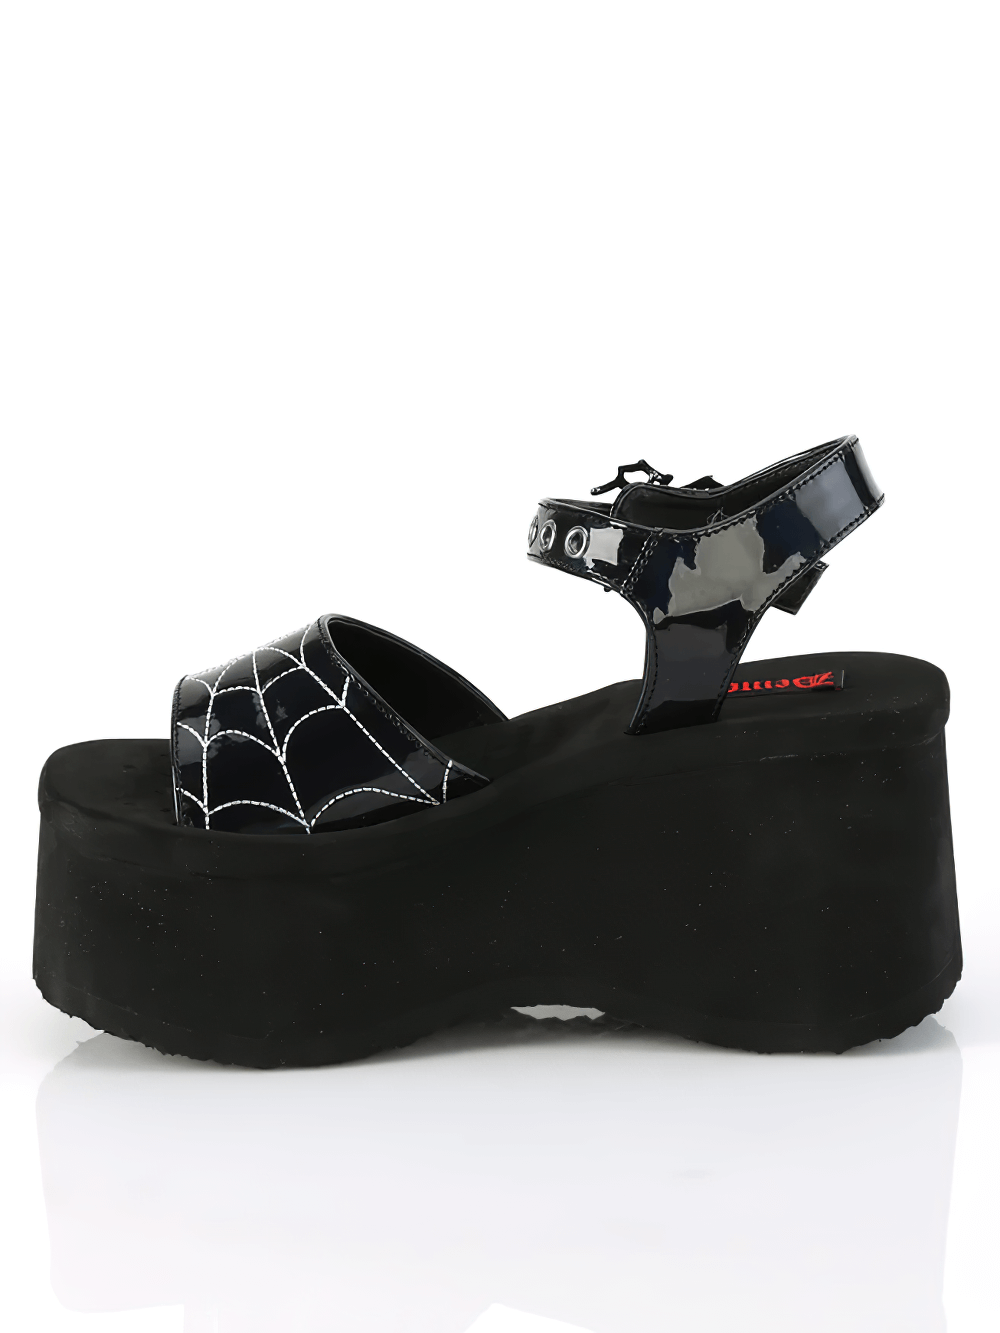 DEMONIA Holographic Spider Web Patent Leather Sandals